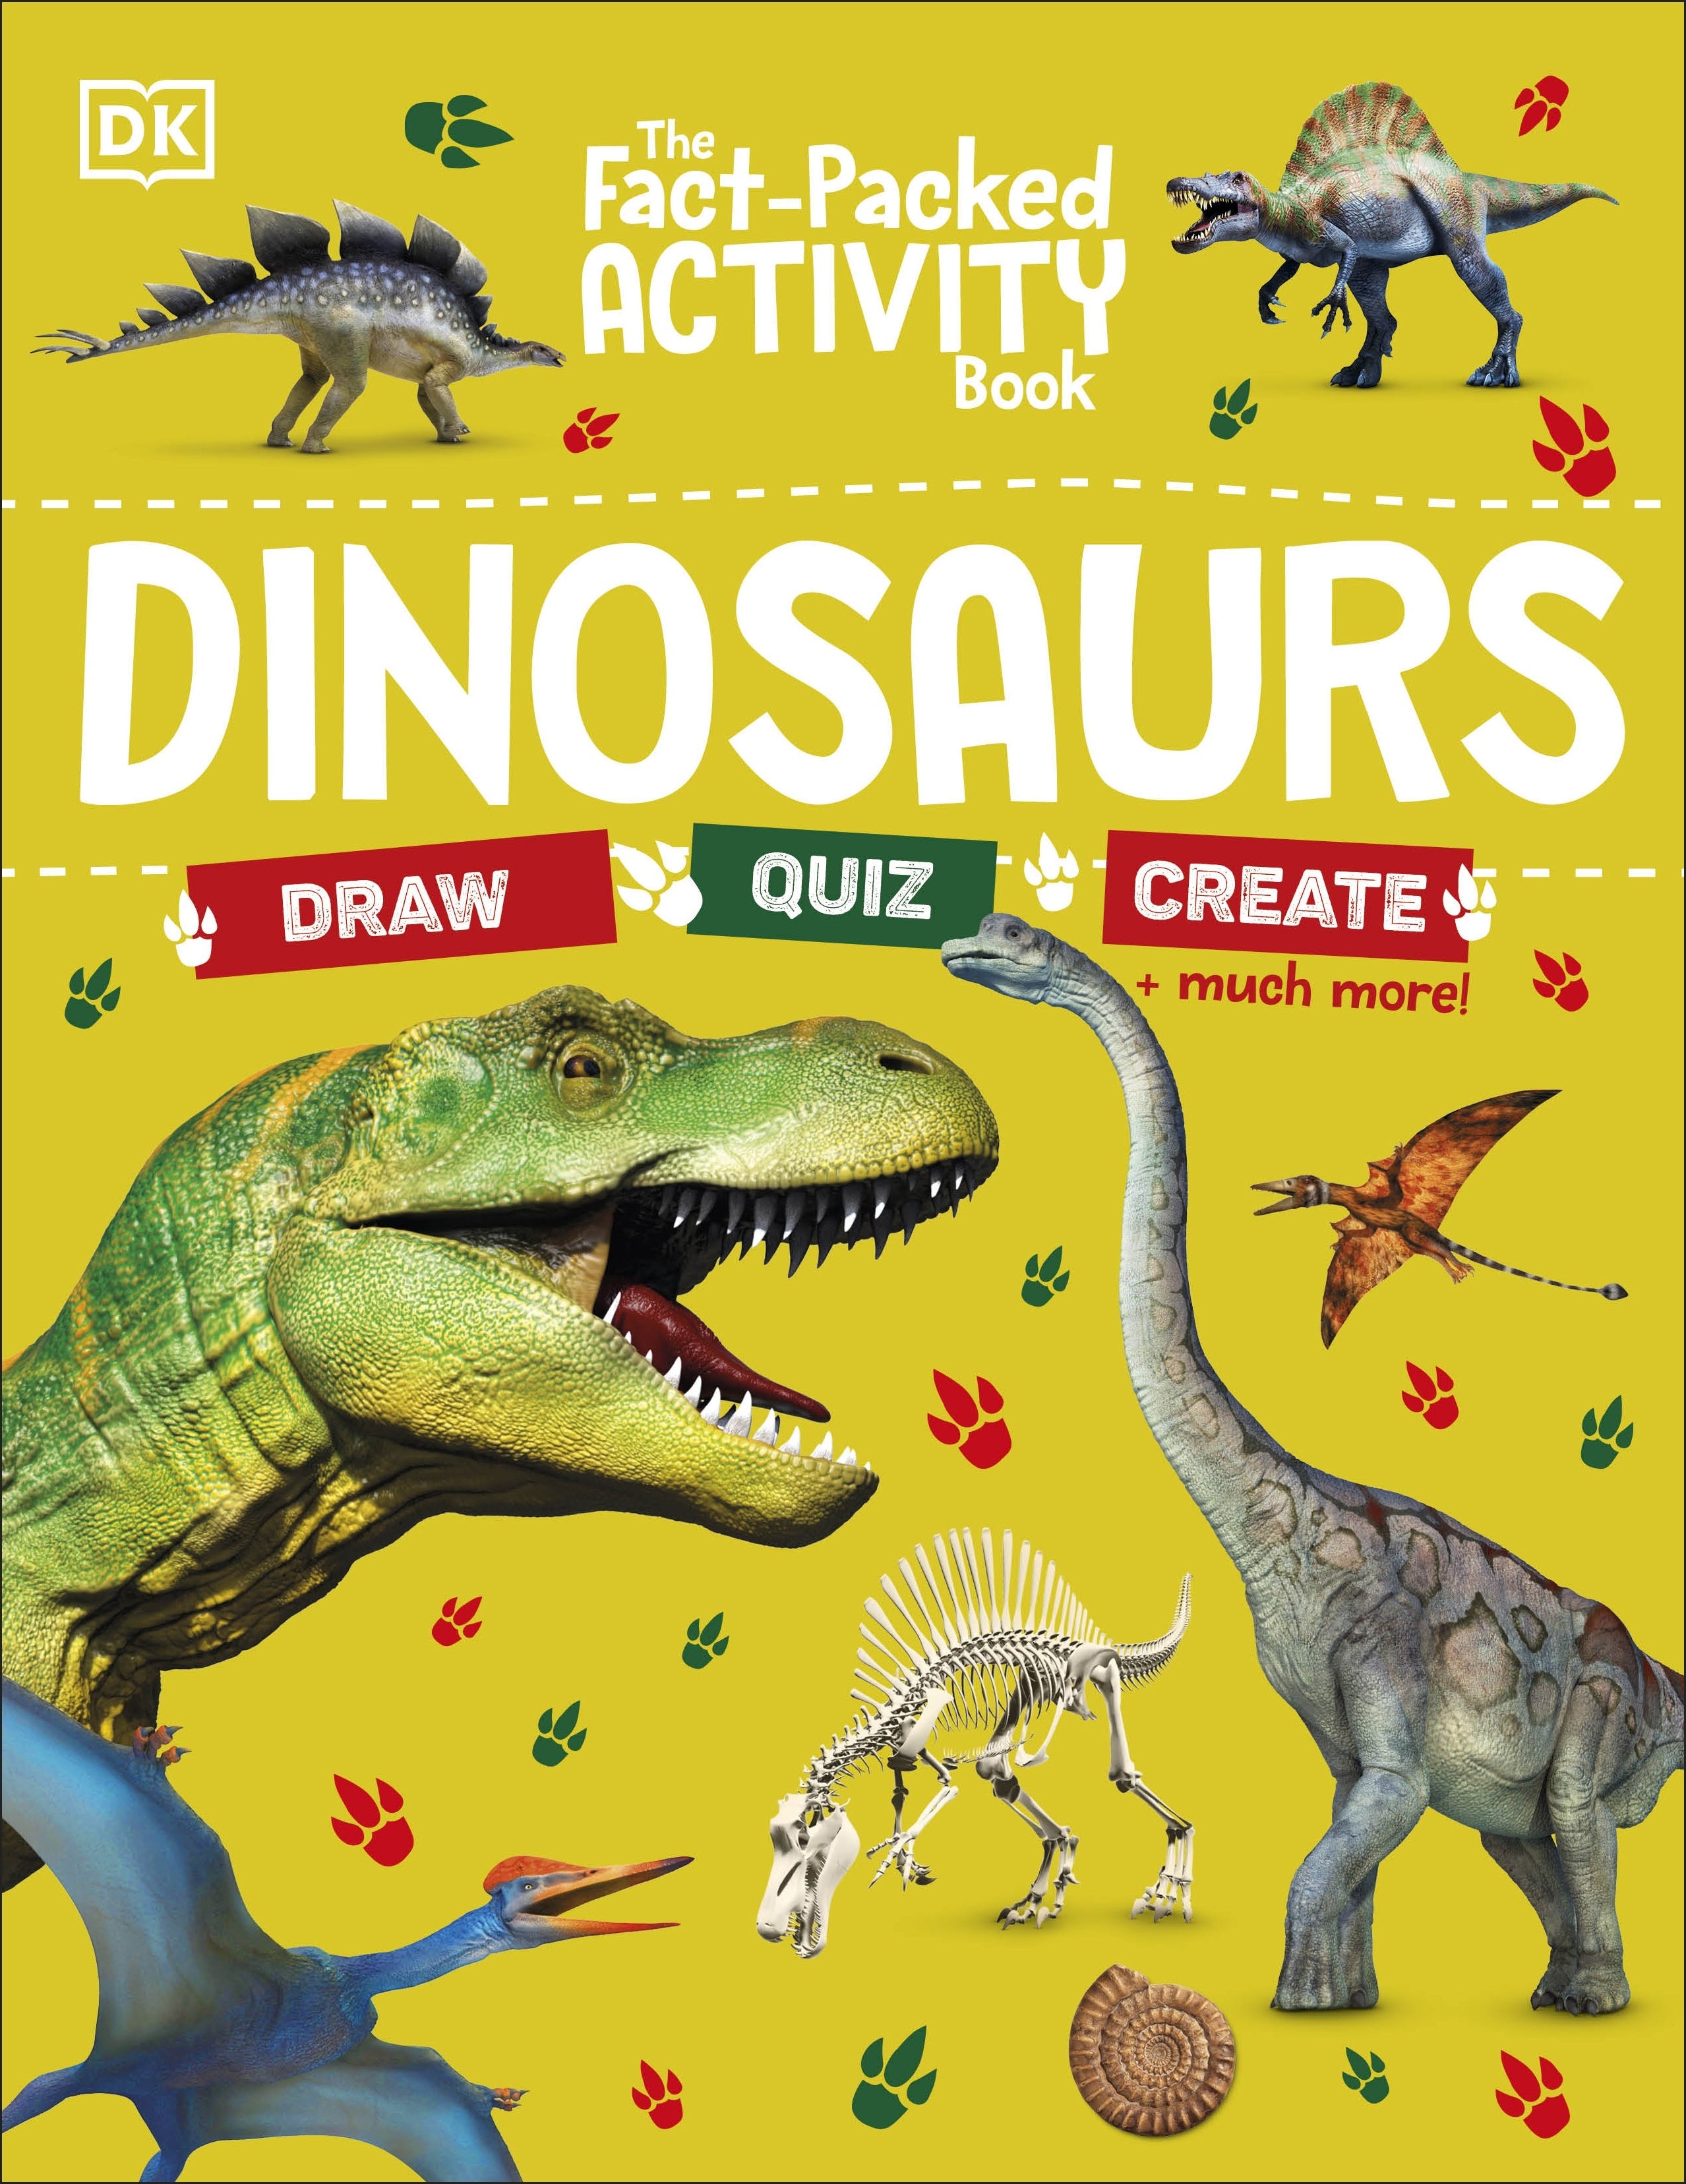 The Fact-Packed Activity Book: Dinosaurs DK